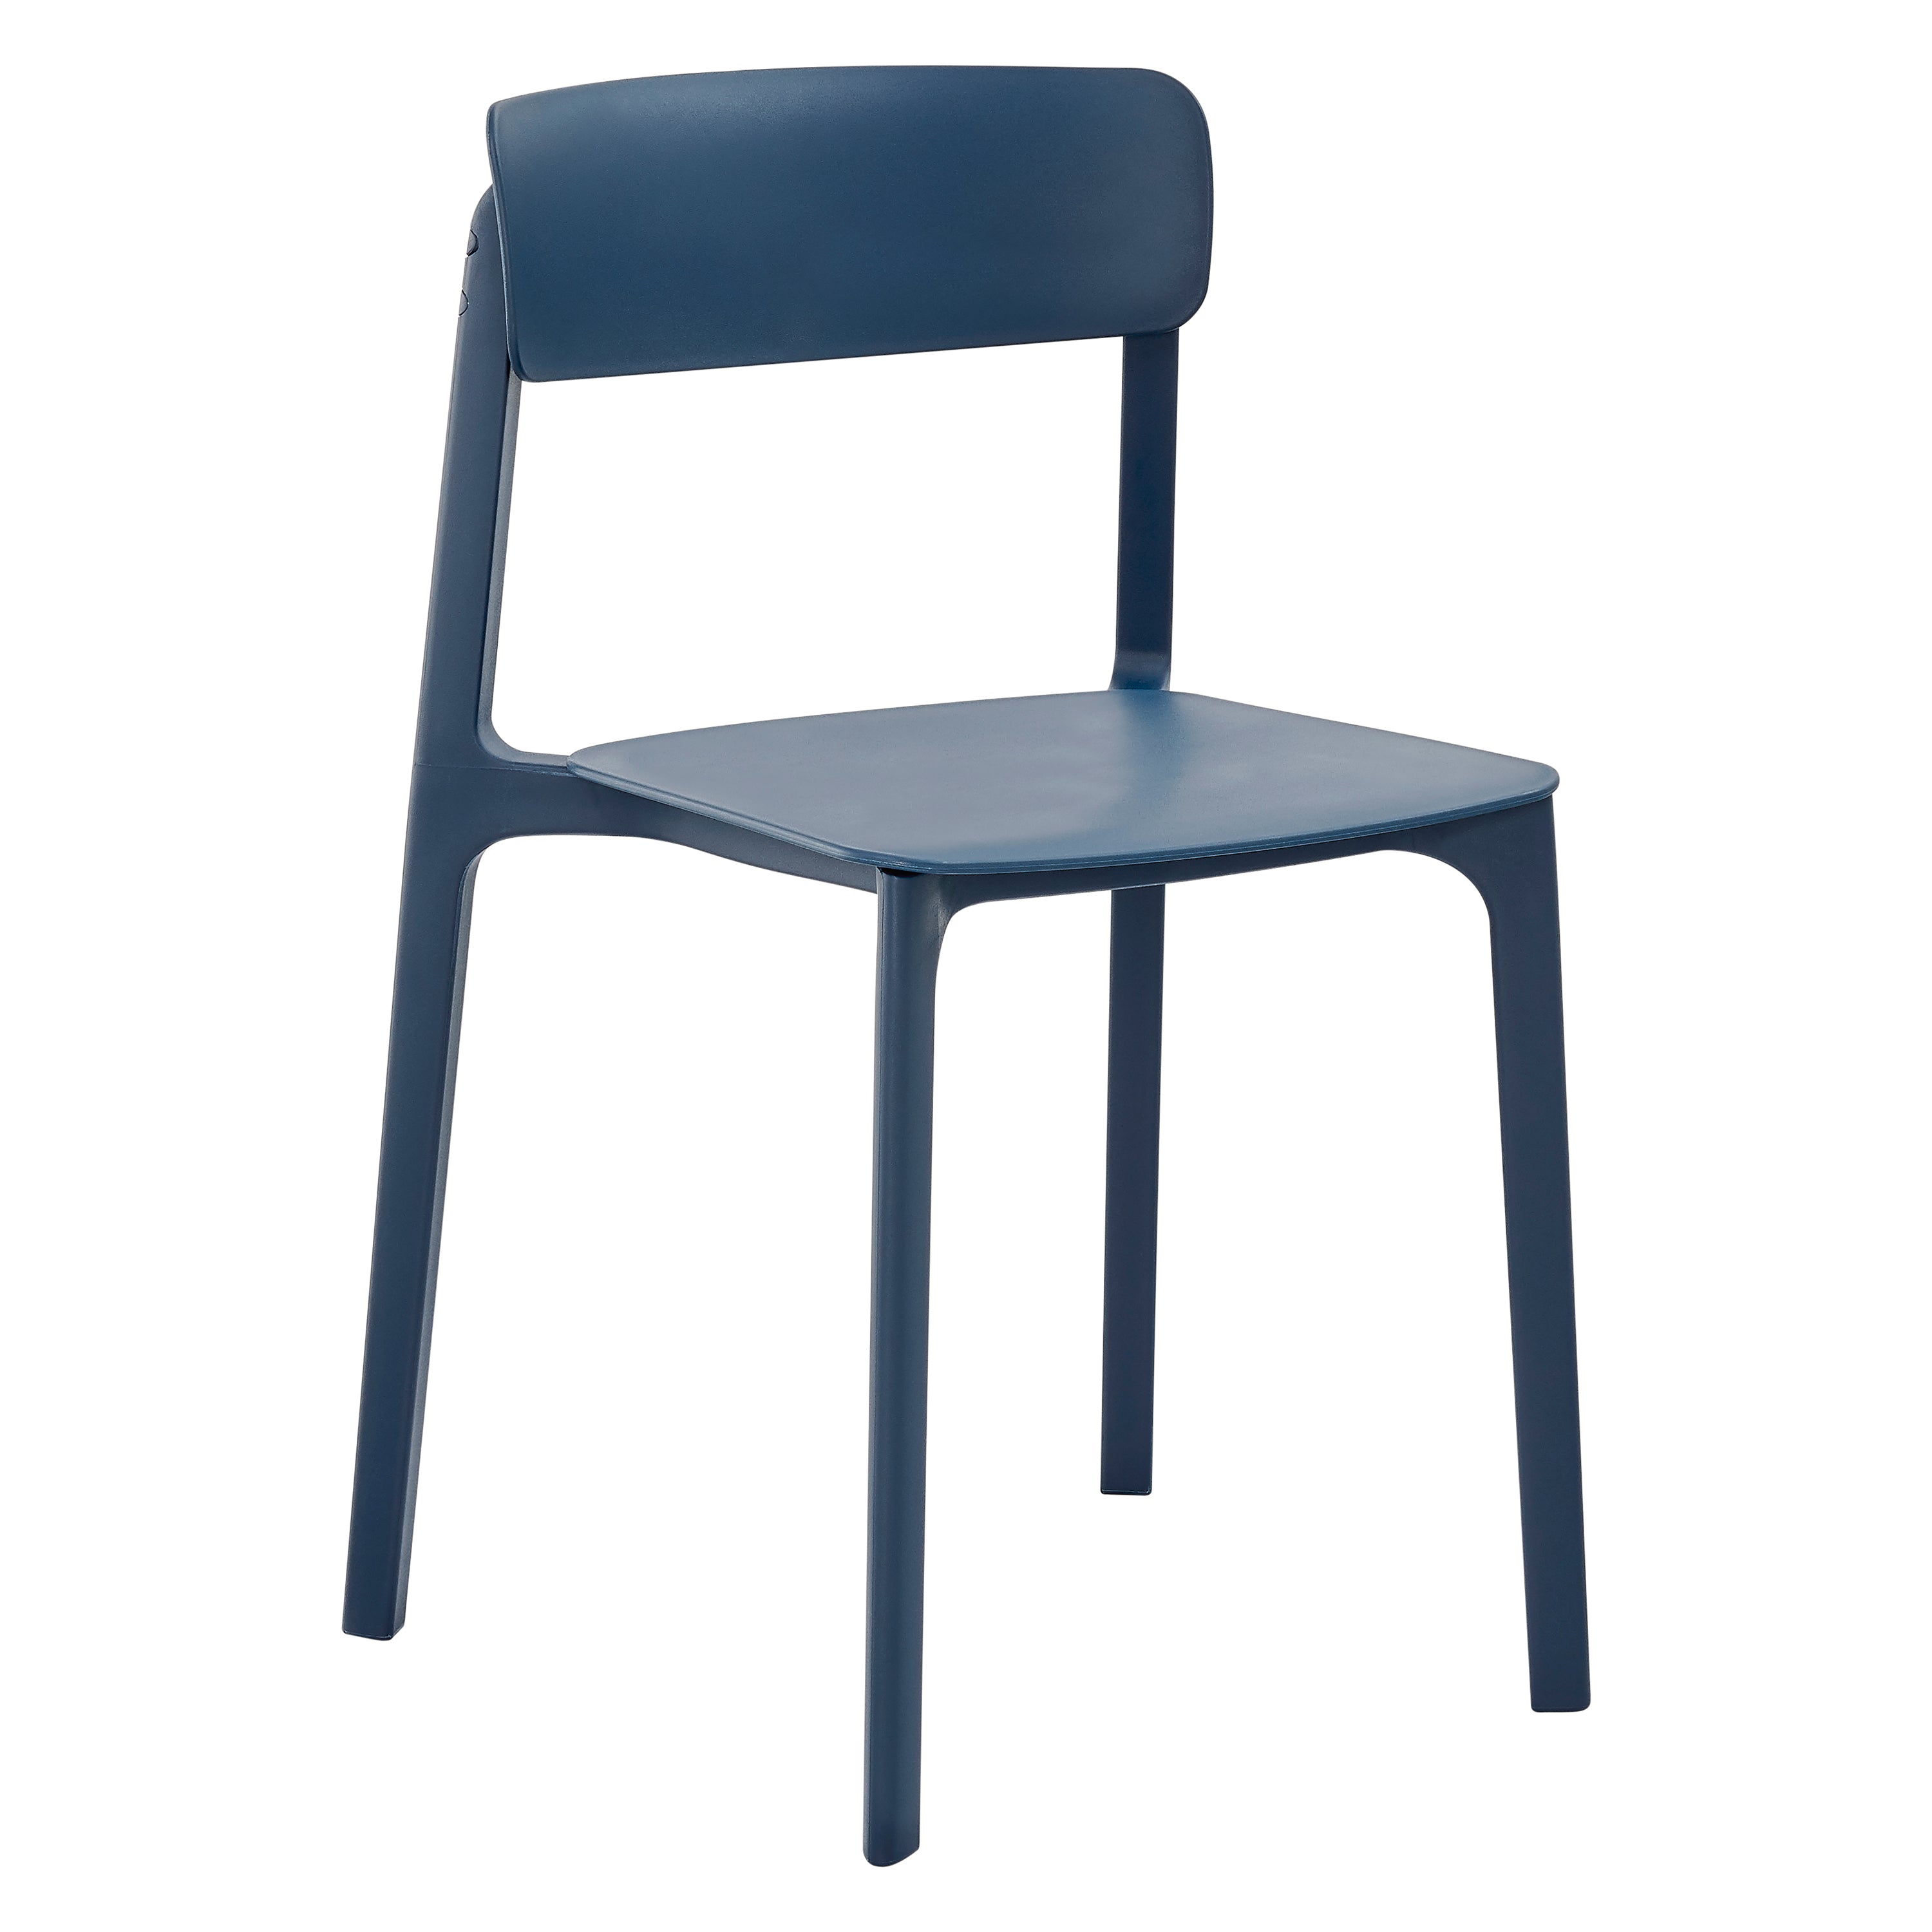 Euro Style Dining Chairs - Tibo Stackable Side Chair in Blue Polypropylene - Set of 2